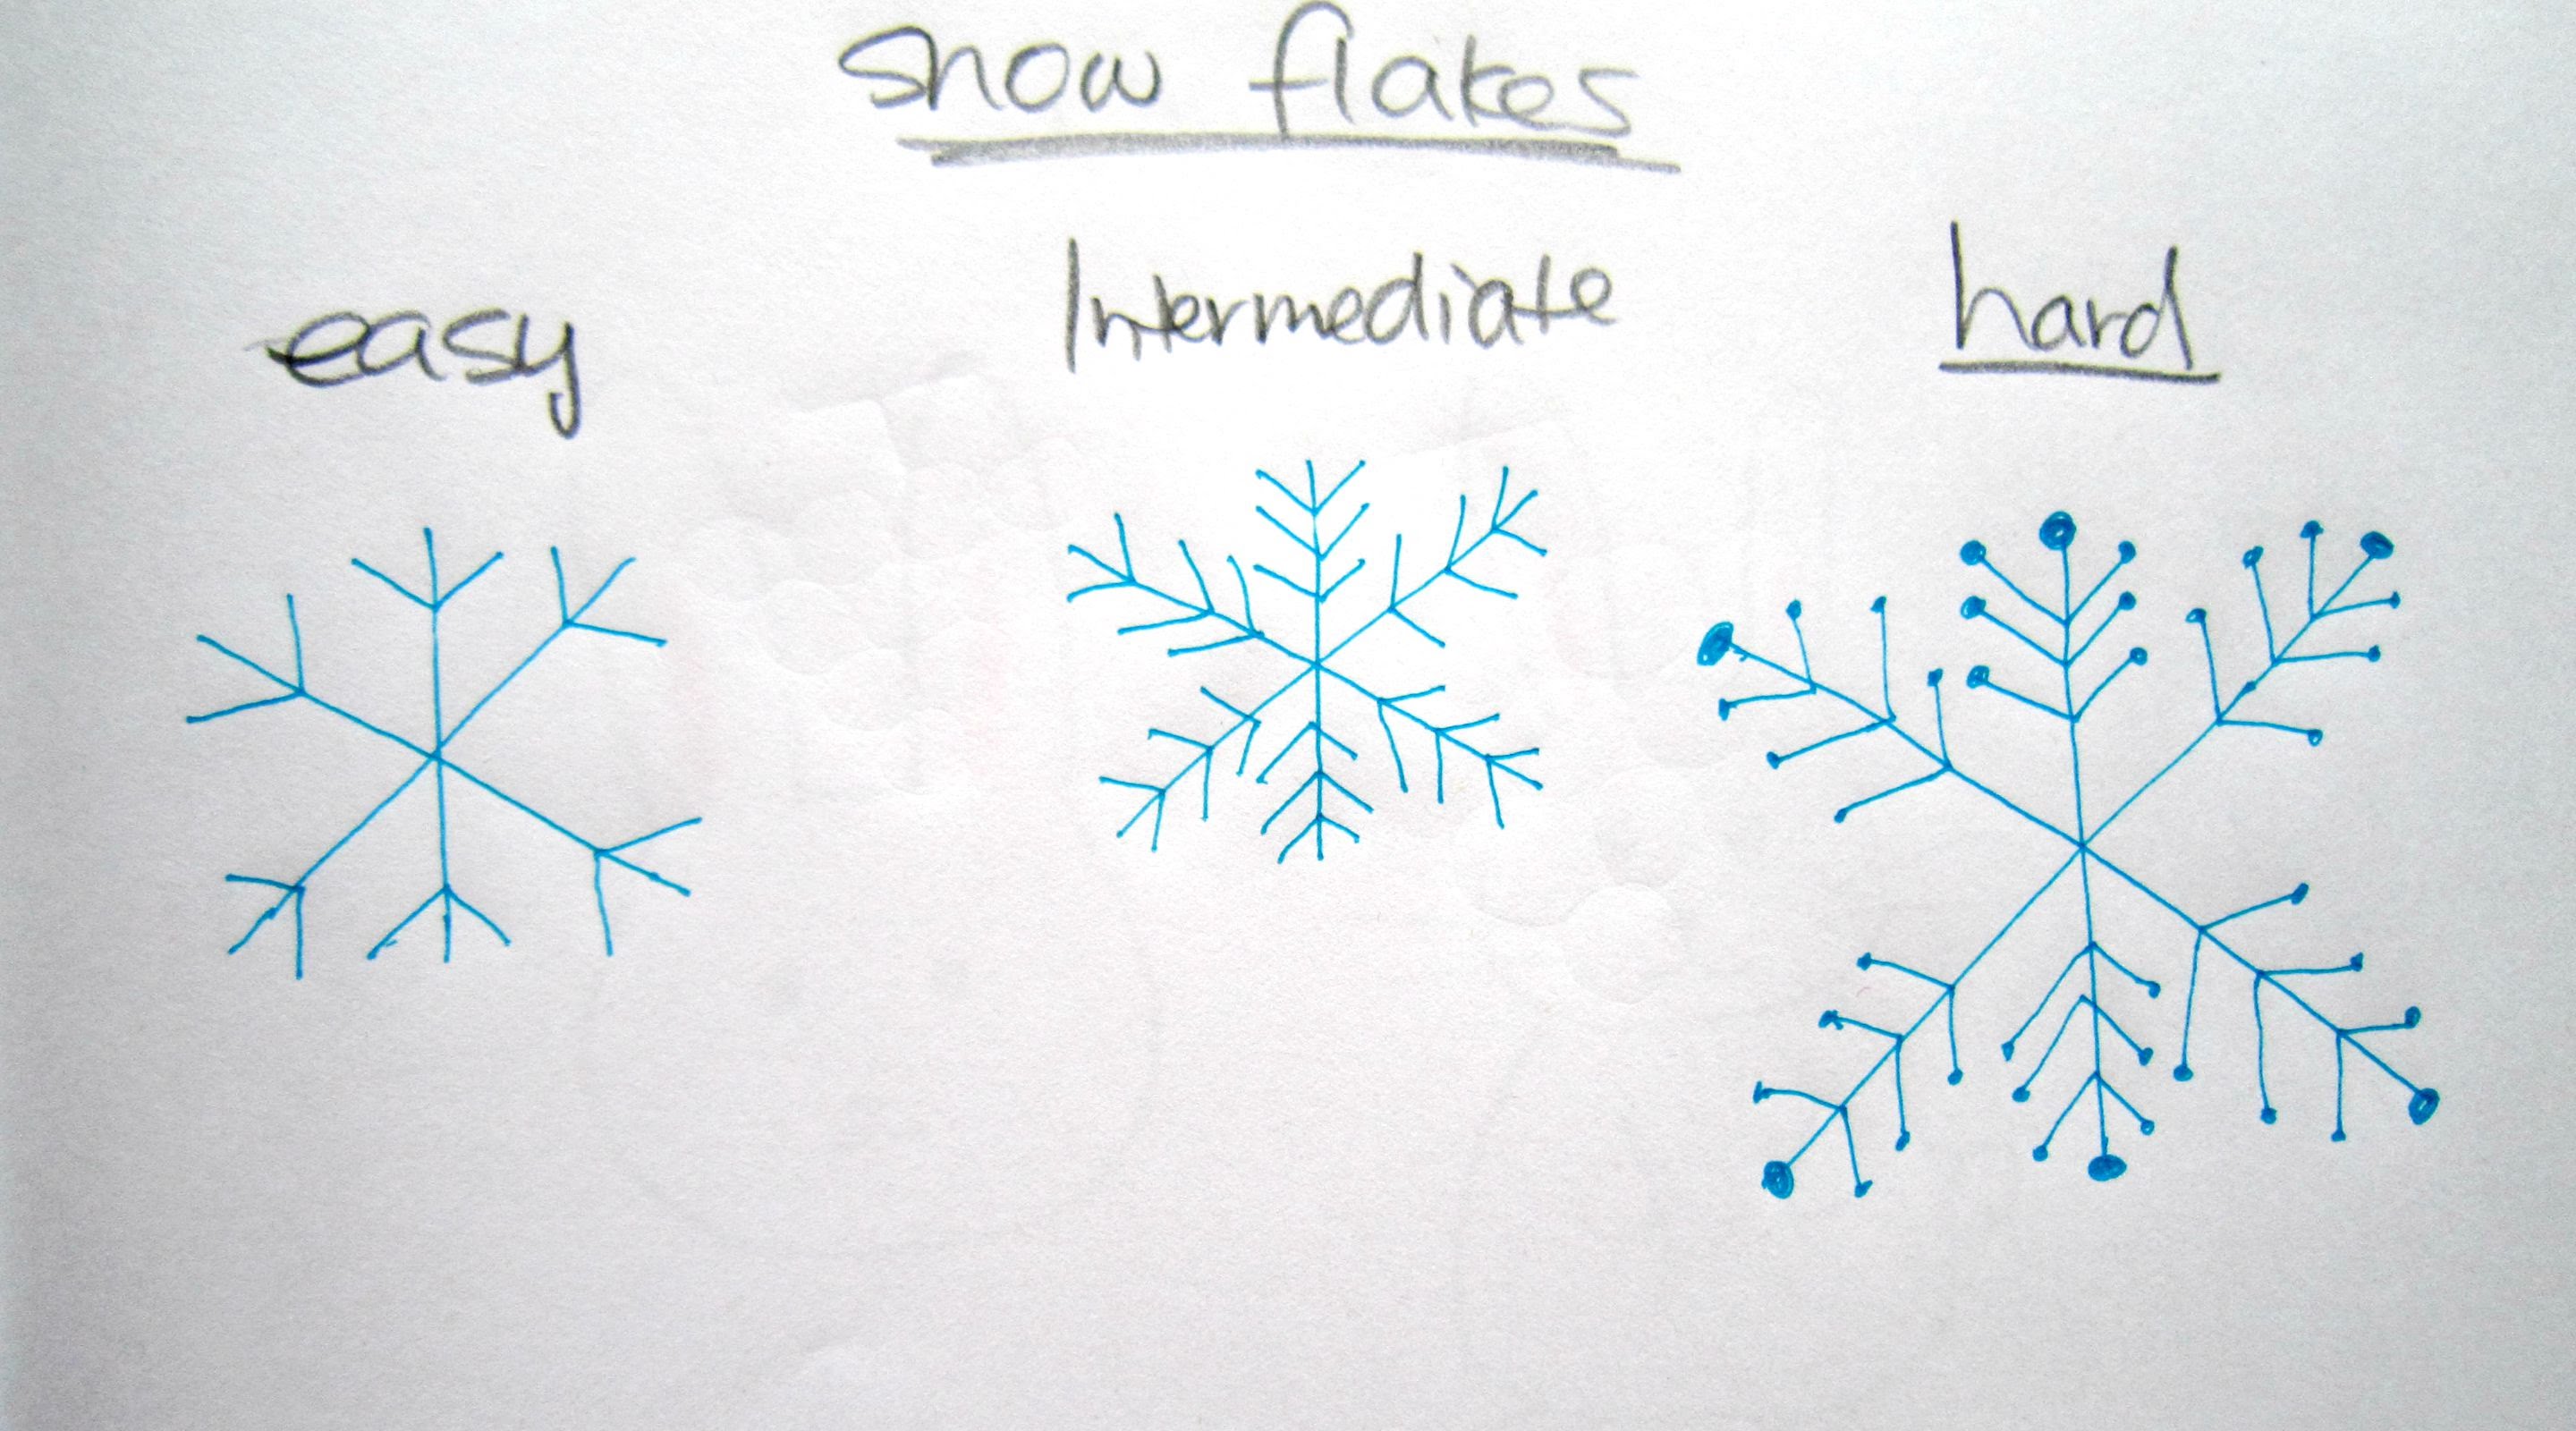 How to draw Snow